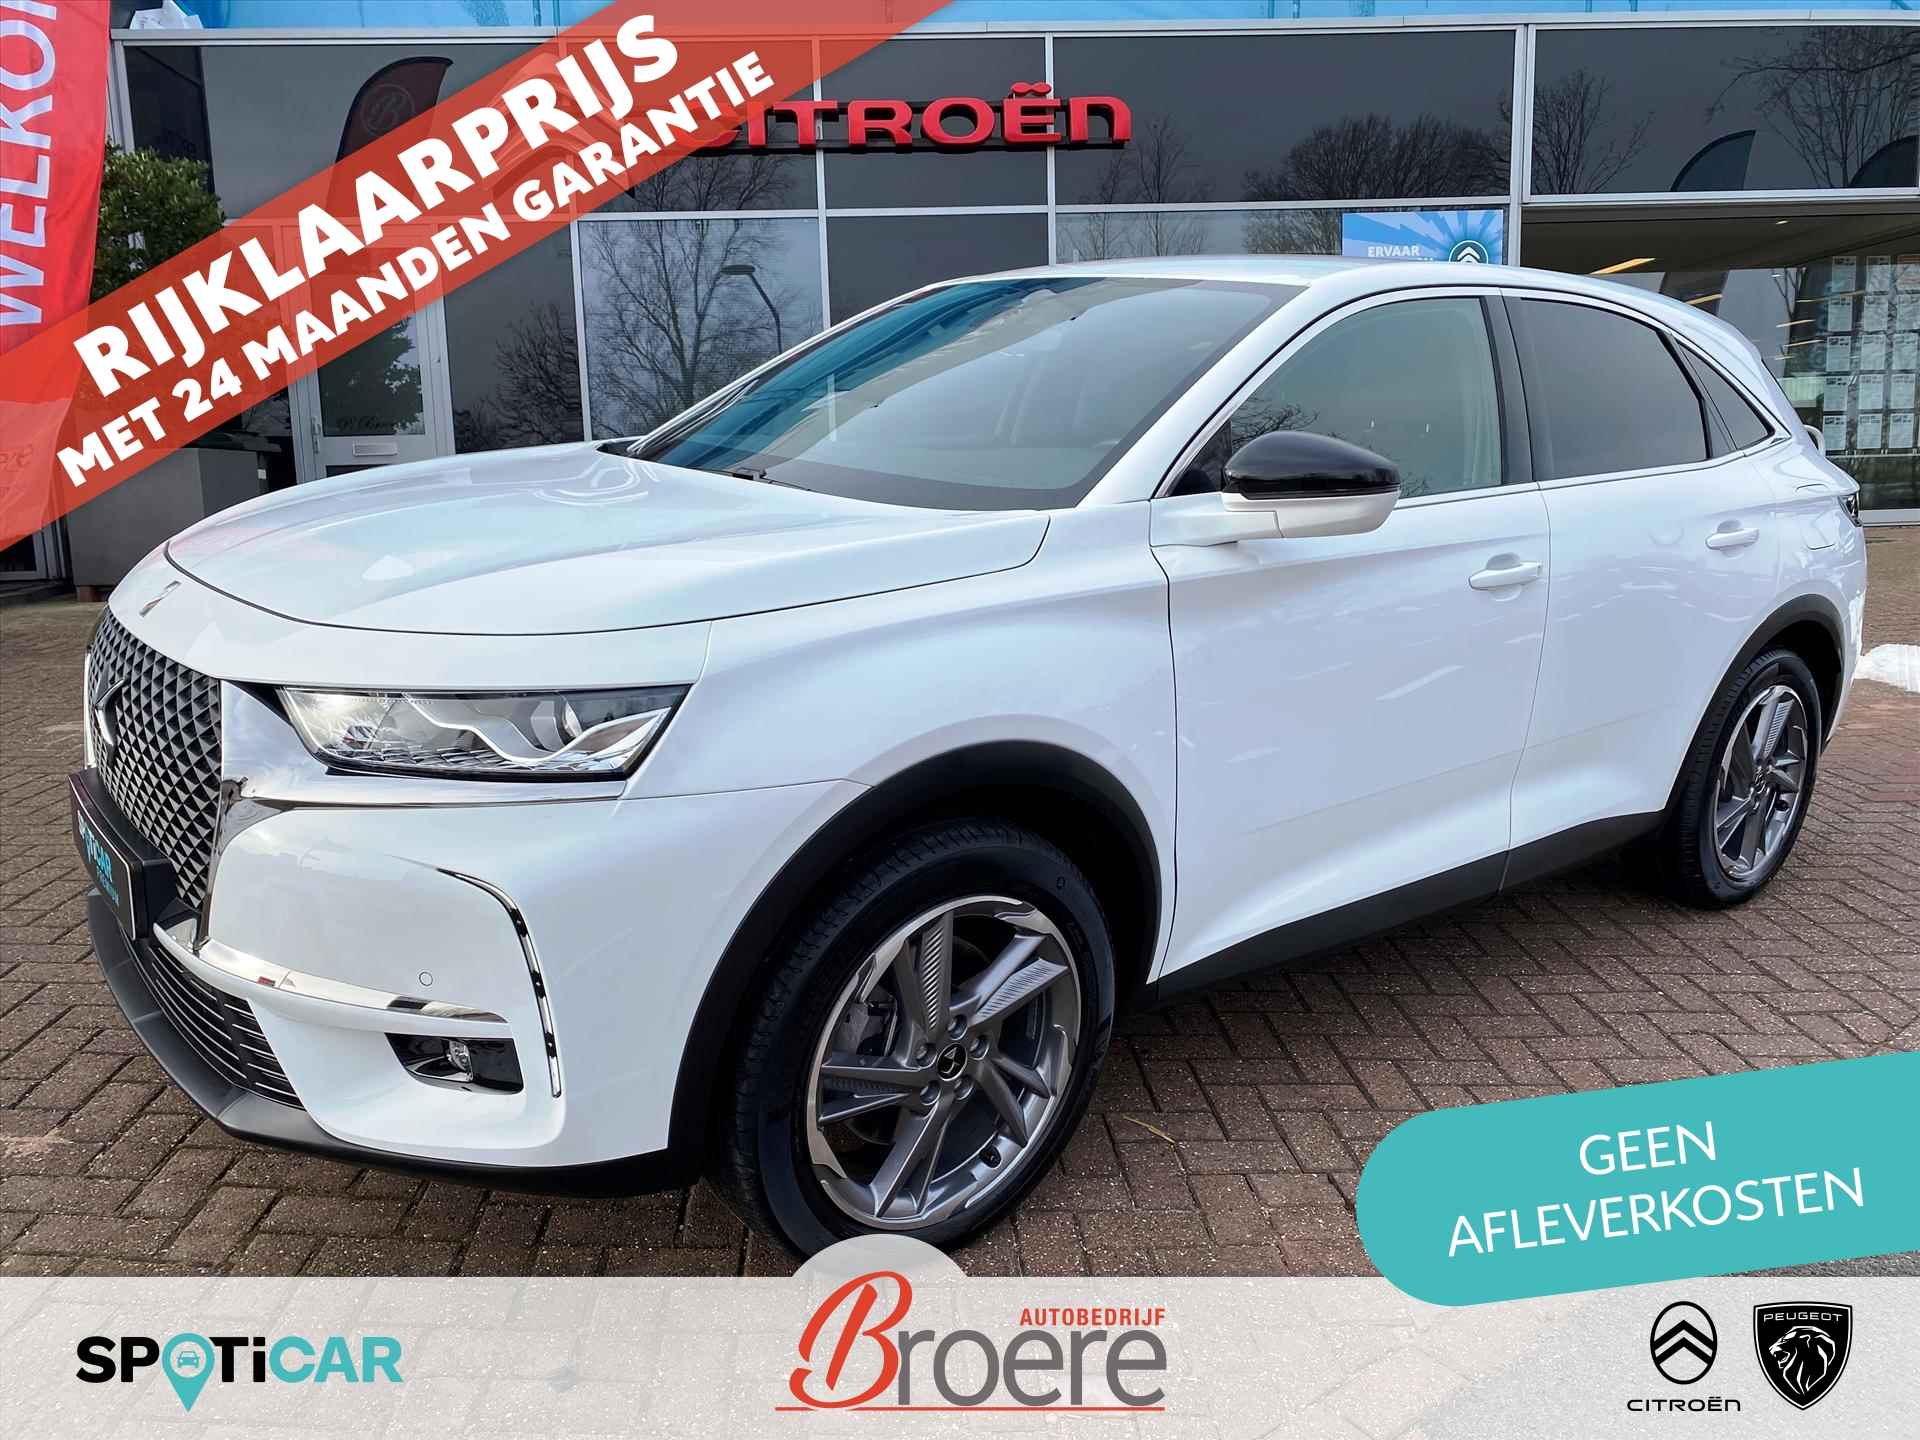 DS Ds 7 Crossback 1.6 E-TENSE 225pk Automaat Business Hybrid |camera, parkeersensoren voor en achter, dab, 19 inch velgen, apple car play, android auto, climate, cruise - 1/61